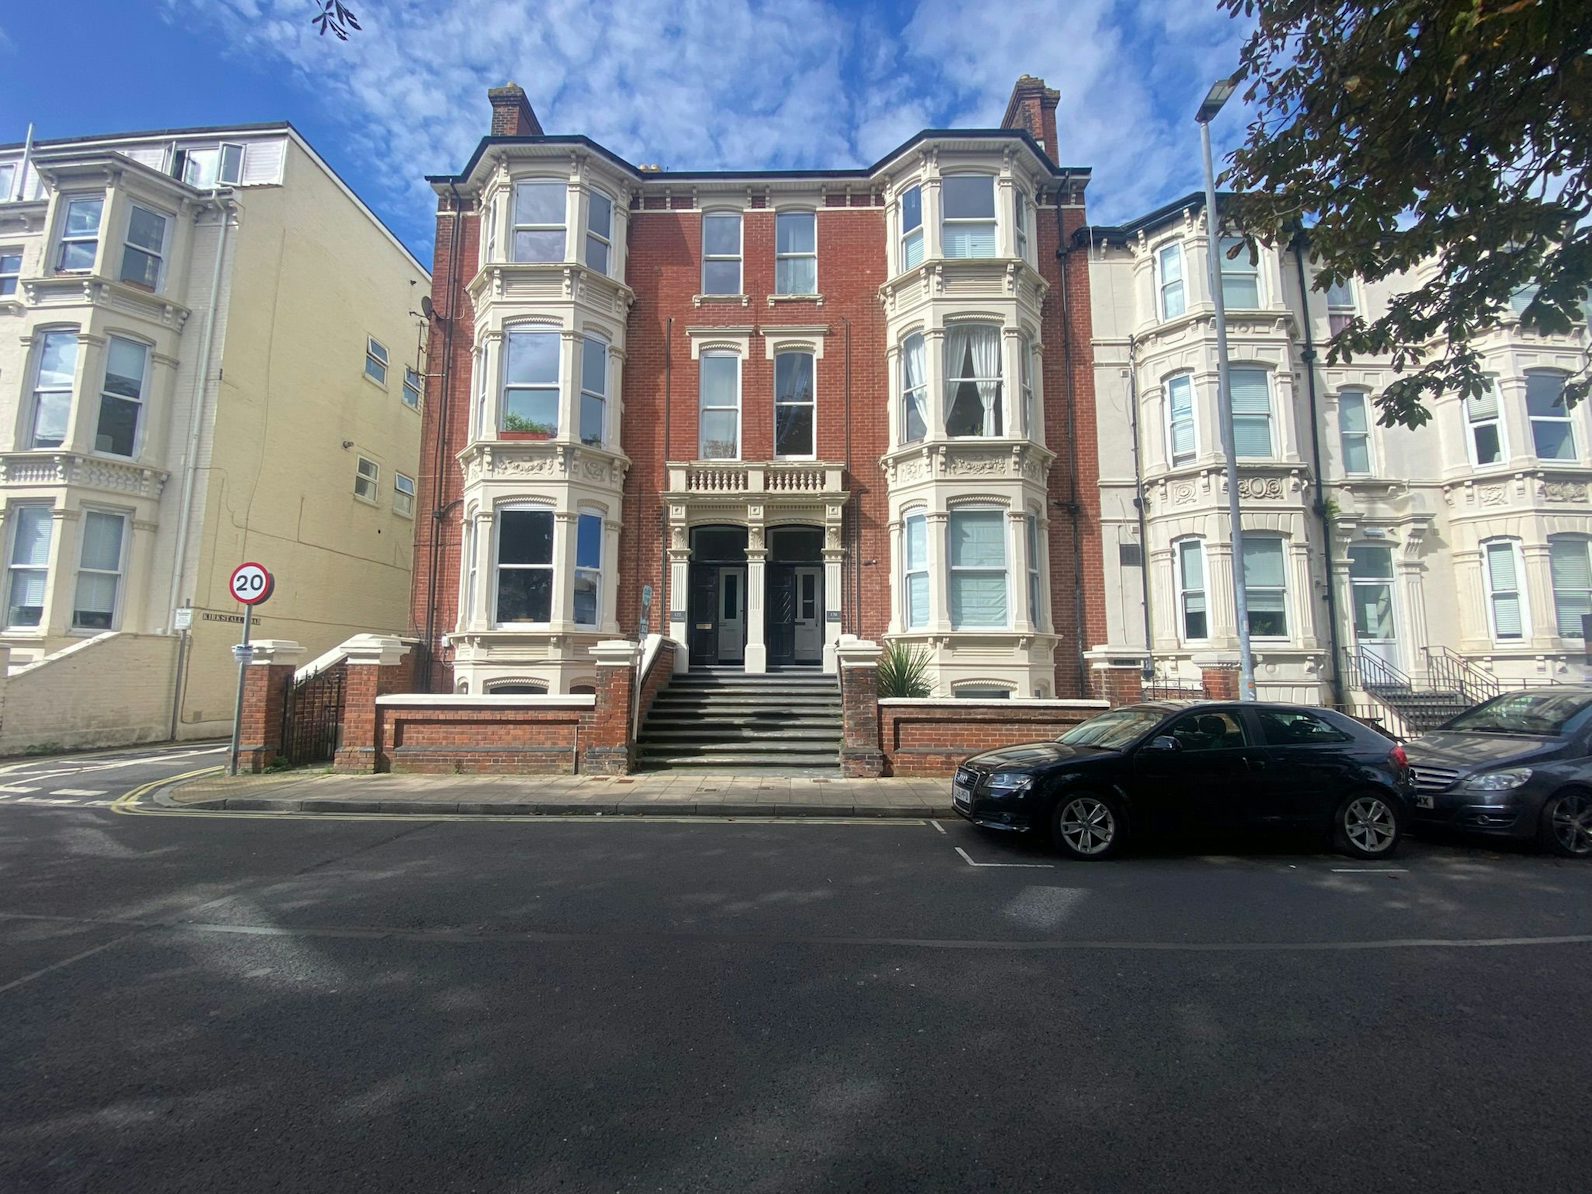 Flat for sale on Clarendon Road Southsea, Portsmouth, PO4